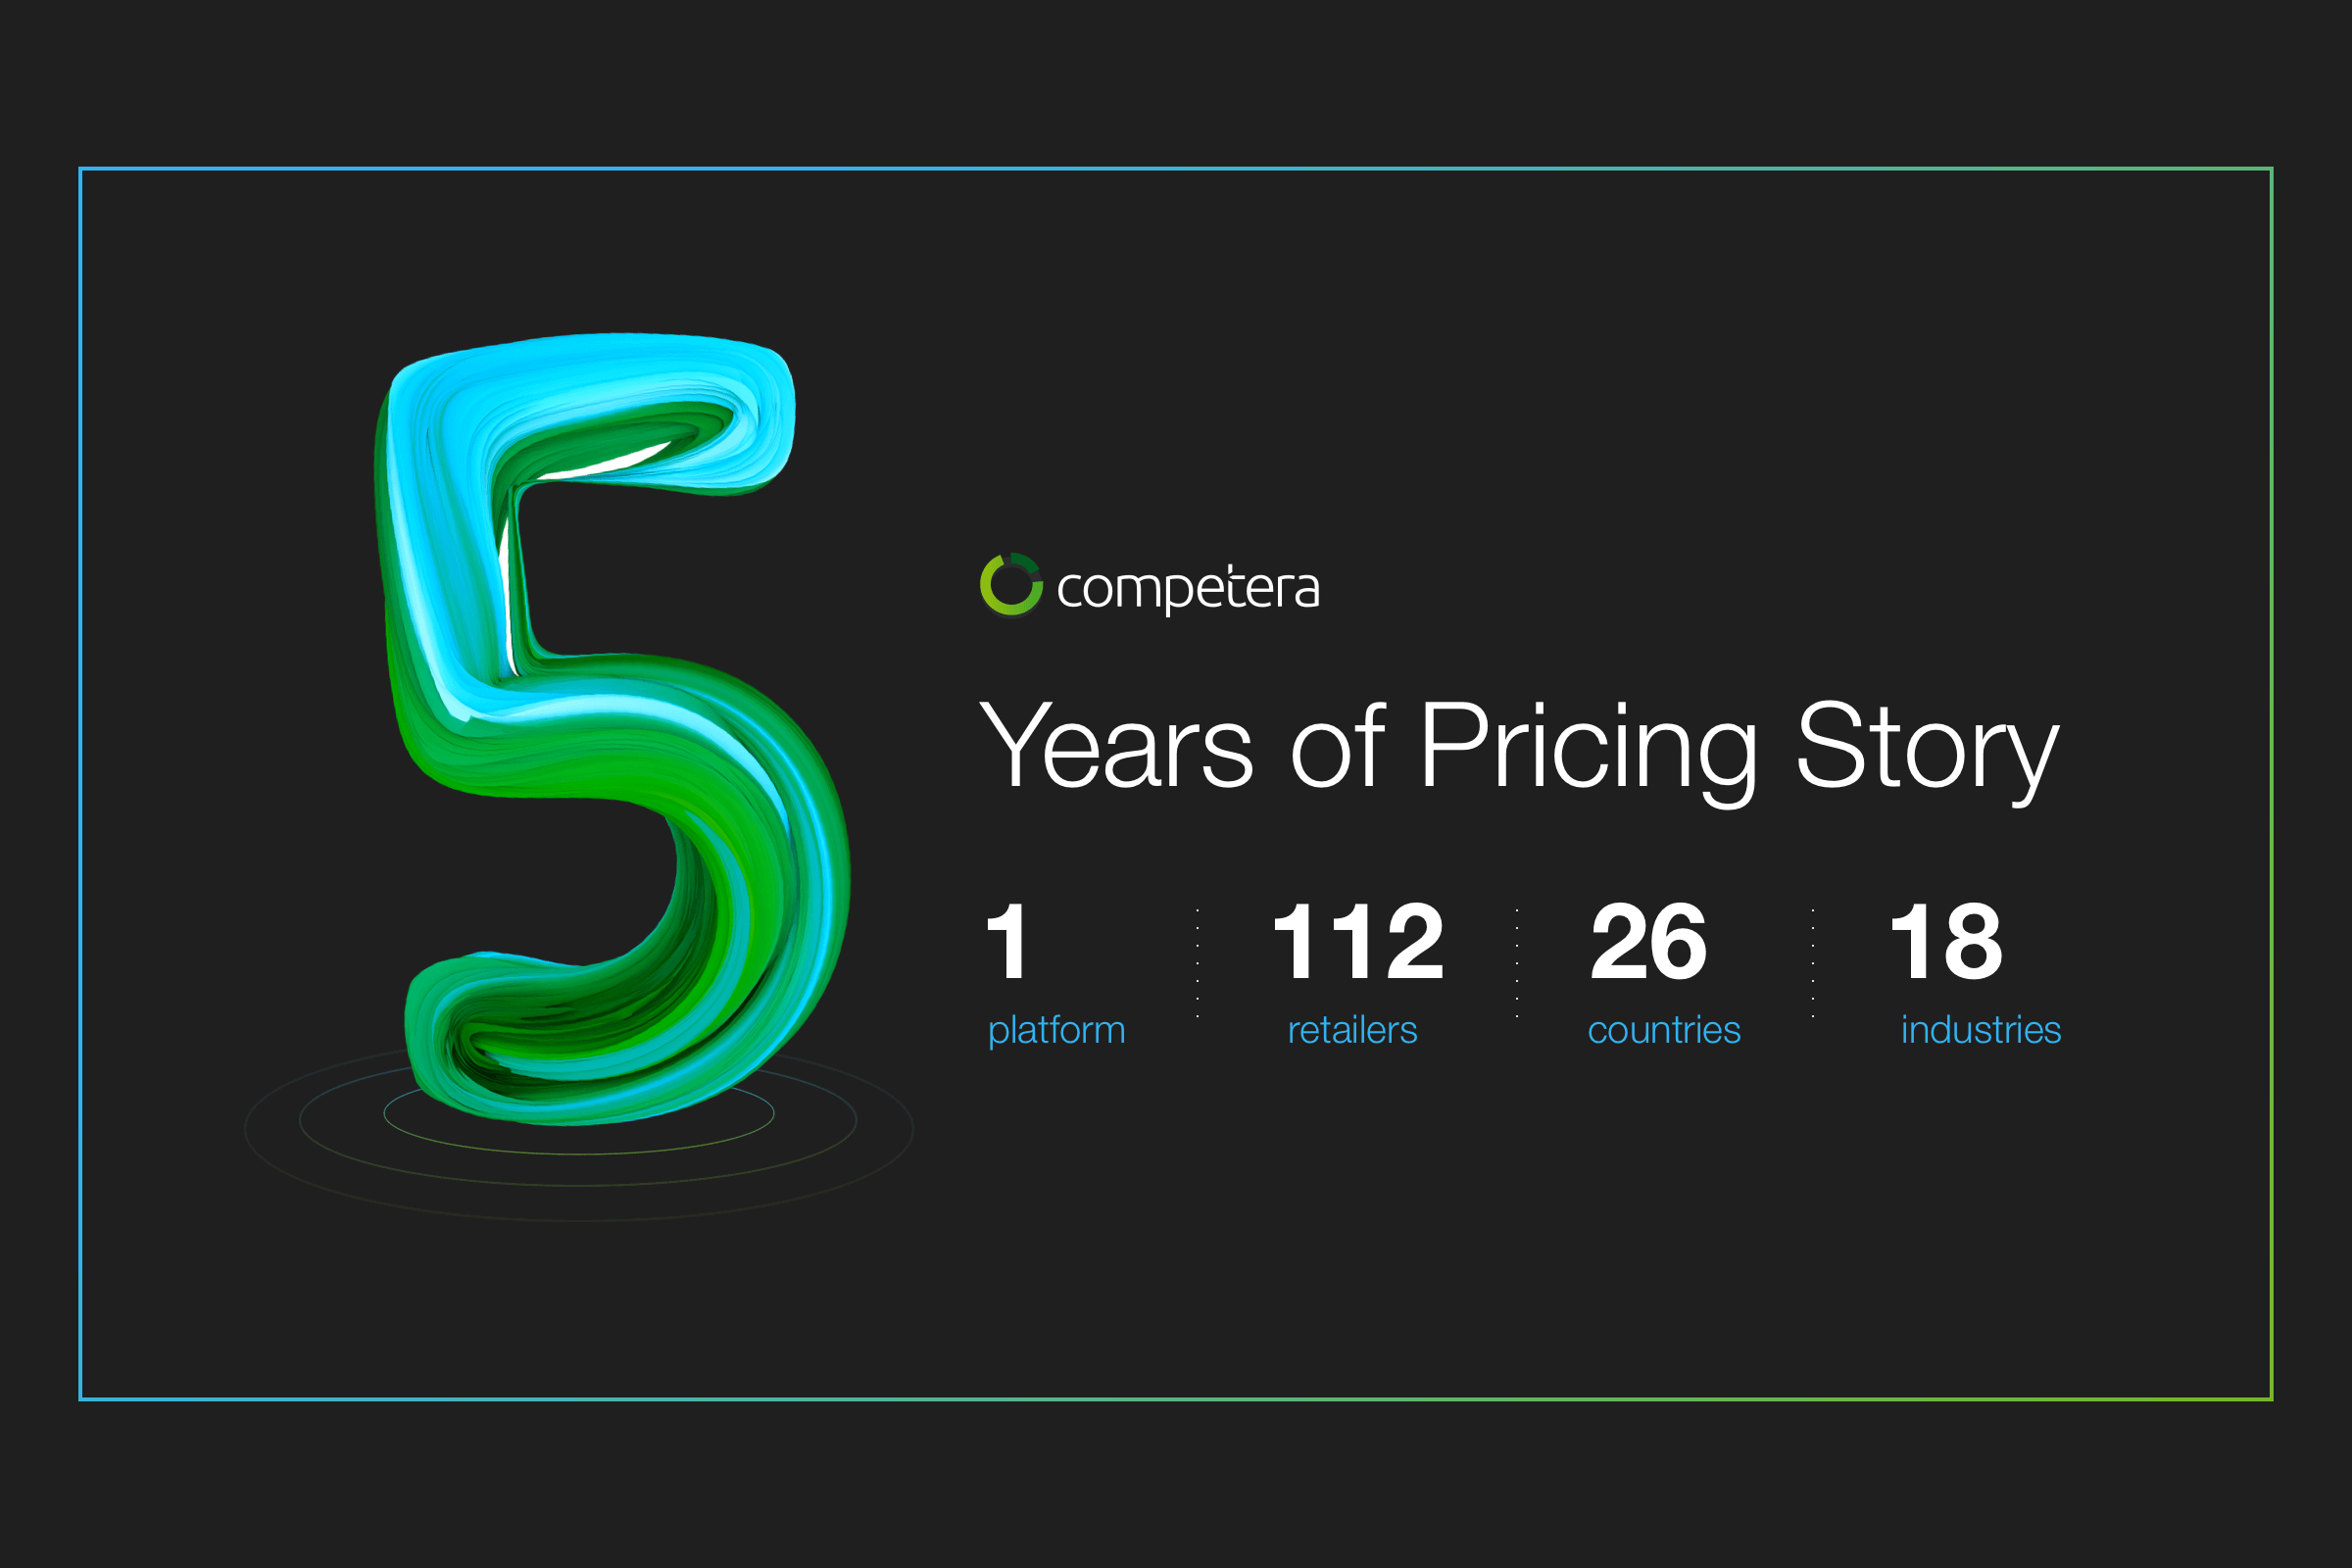 On April 25th Competera turns five years old. Learn about this fantastic journey from the company's CEO Aleksandr Galkin. Our goals, successes, challenges, plans, and much more.